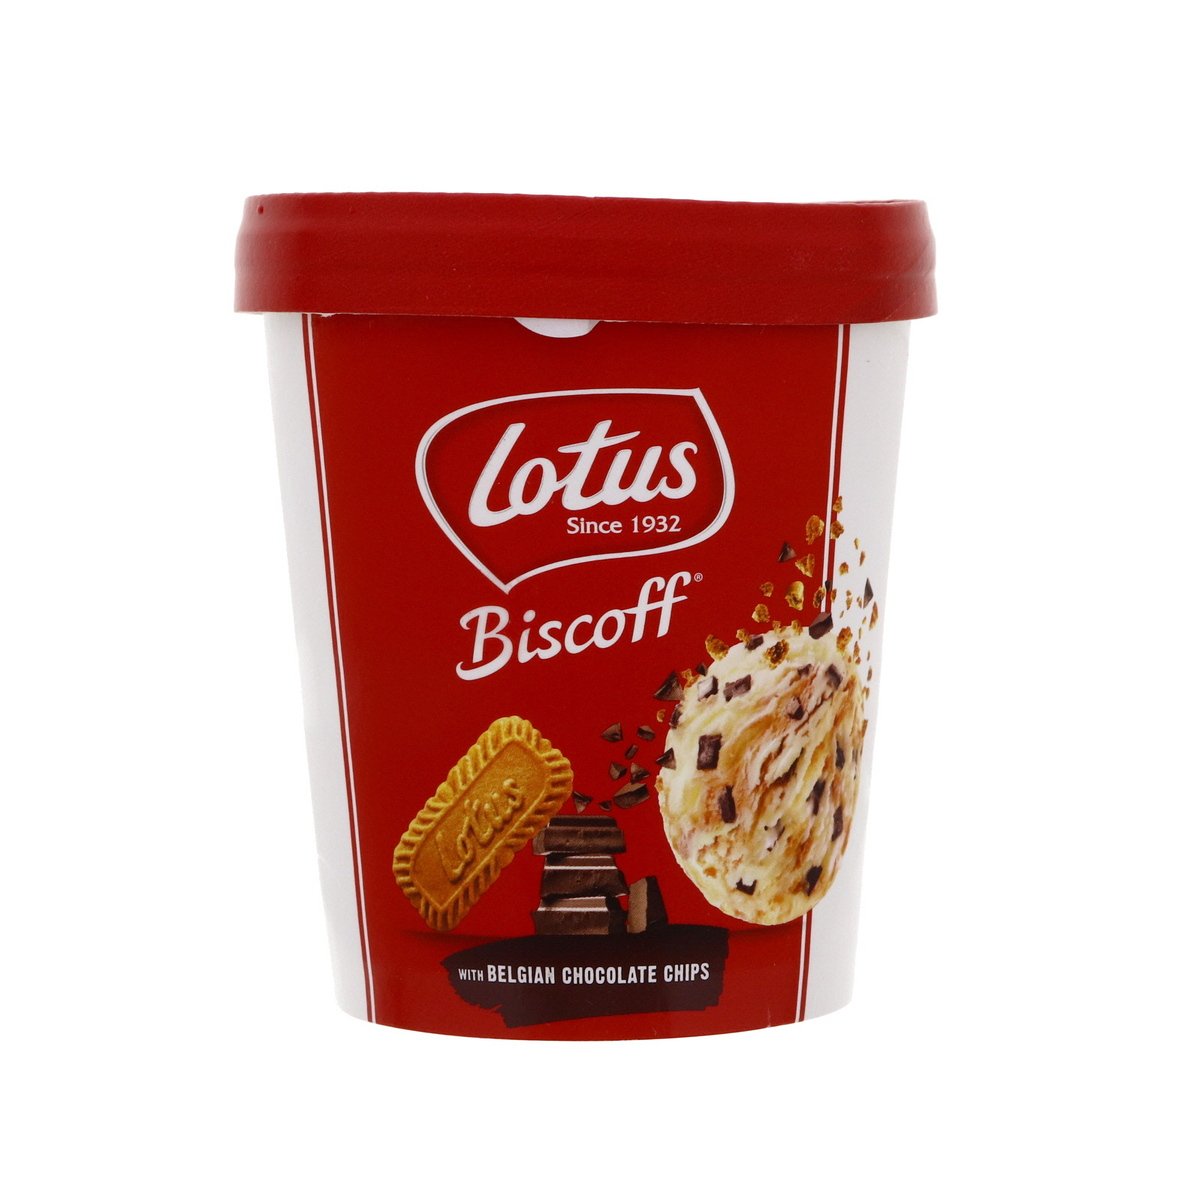 Lotus Biscoff Ice Cream With Belgian Chocolate Chips 460 ml